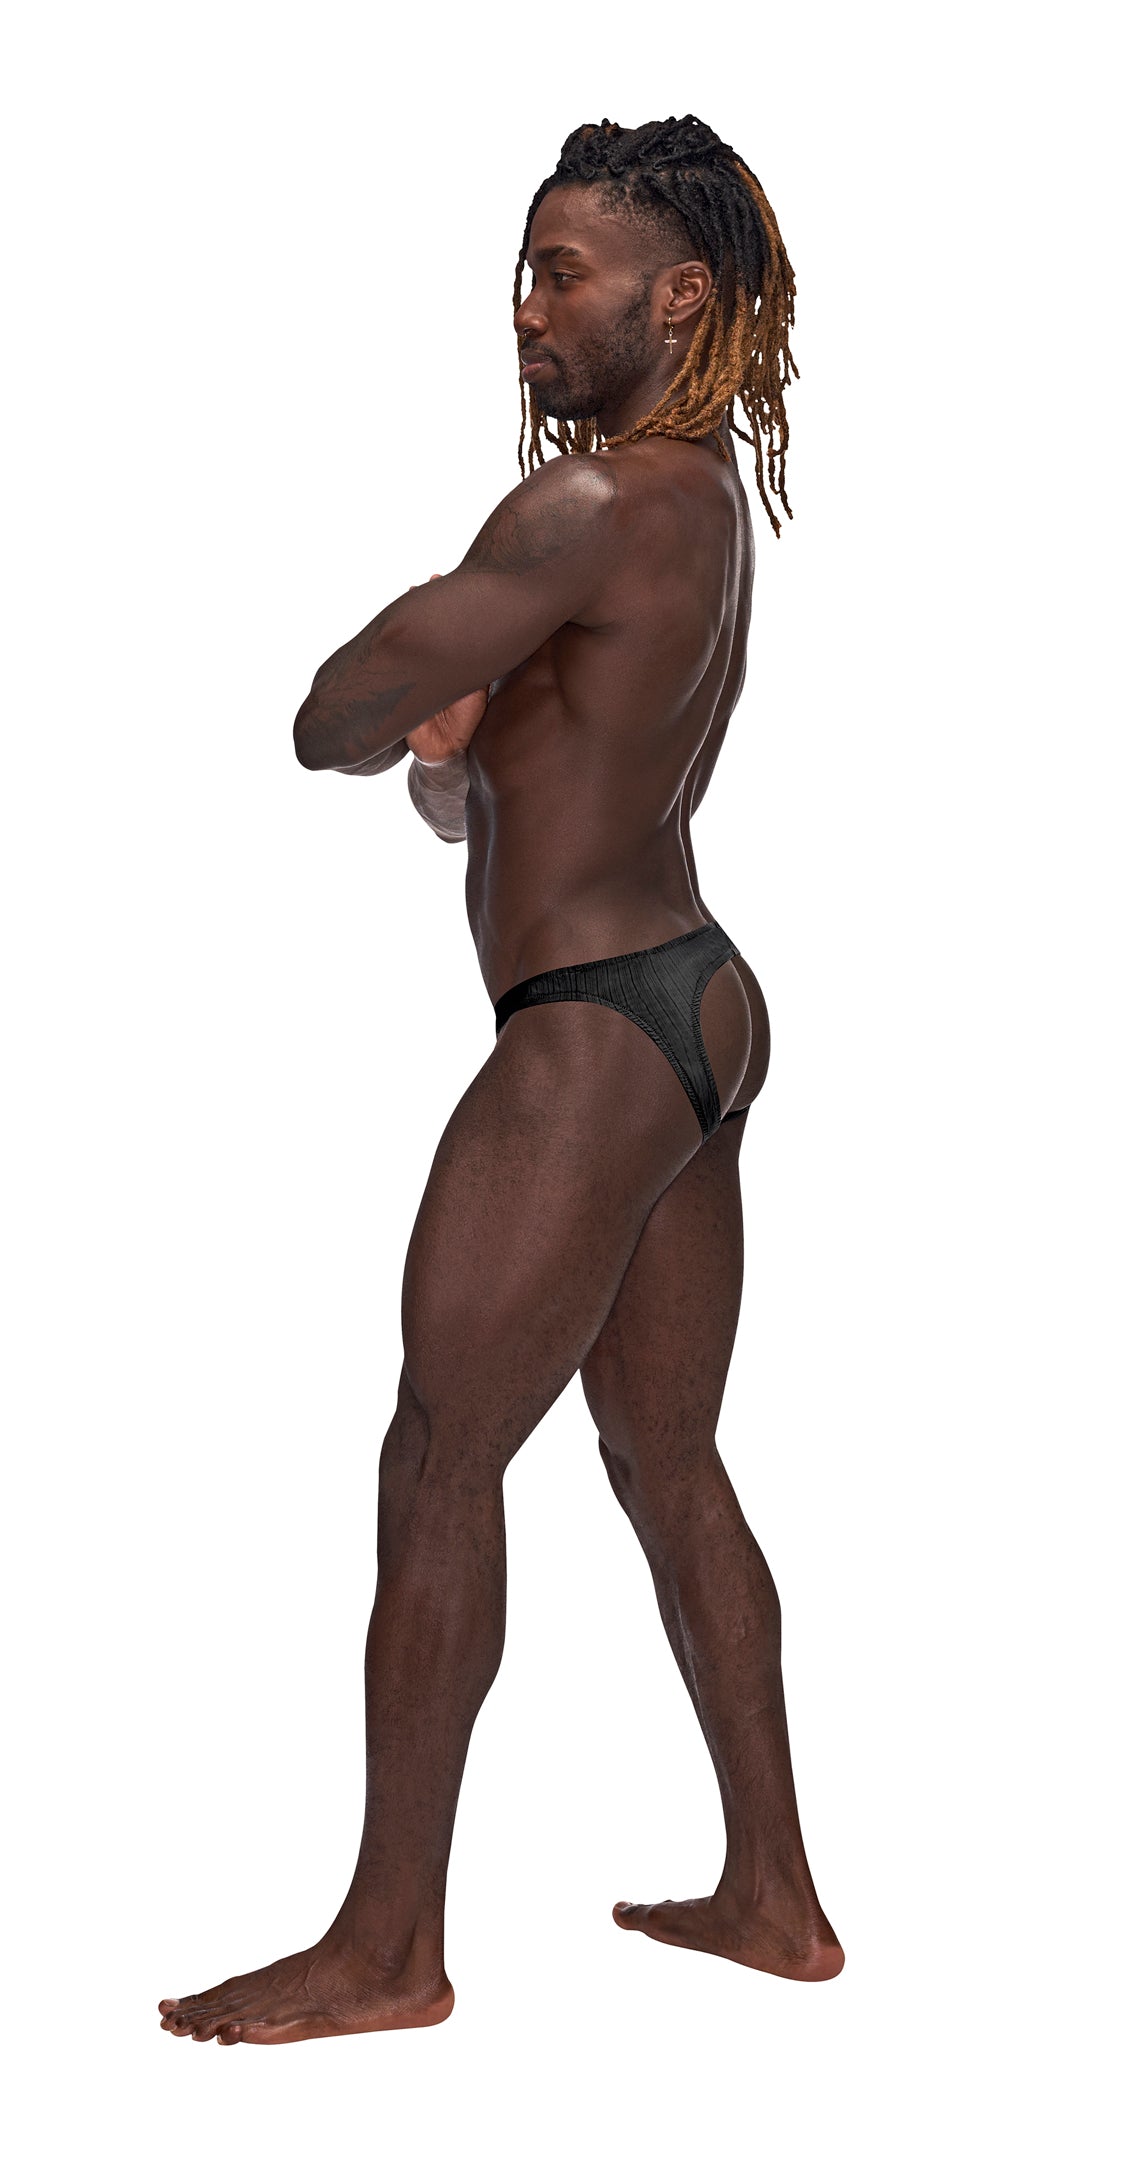 From the Barely There collection by Male Power,  the Moonshine jock brief features a low cut waist, a generous contoured pouch and full rear exposure.   Silky smooth, supple poly spandex. Ultra lightweight with tone on tone verticle striping.   Fabric Content 87% Polymide 13% Spandex  Care Instructions Hand wash separately, cold water, line dry, no bleach  Orders including Male Power items may take up to 2 weeks for delivery. All Male Power and MaleBasics sales are final.